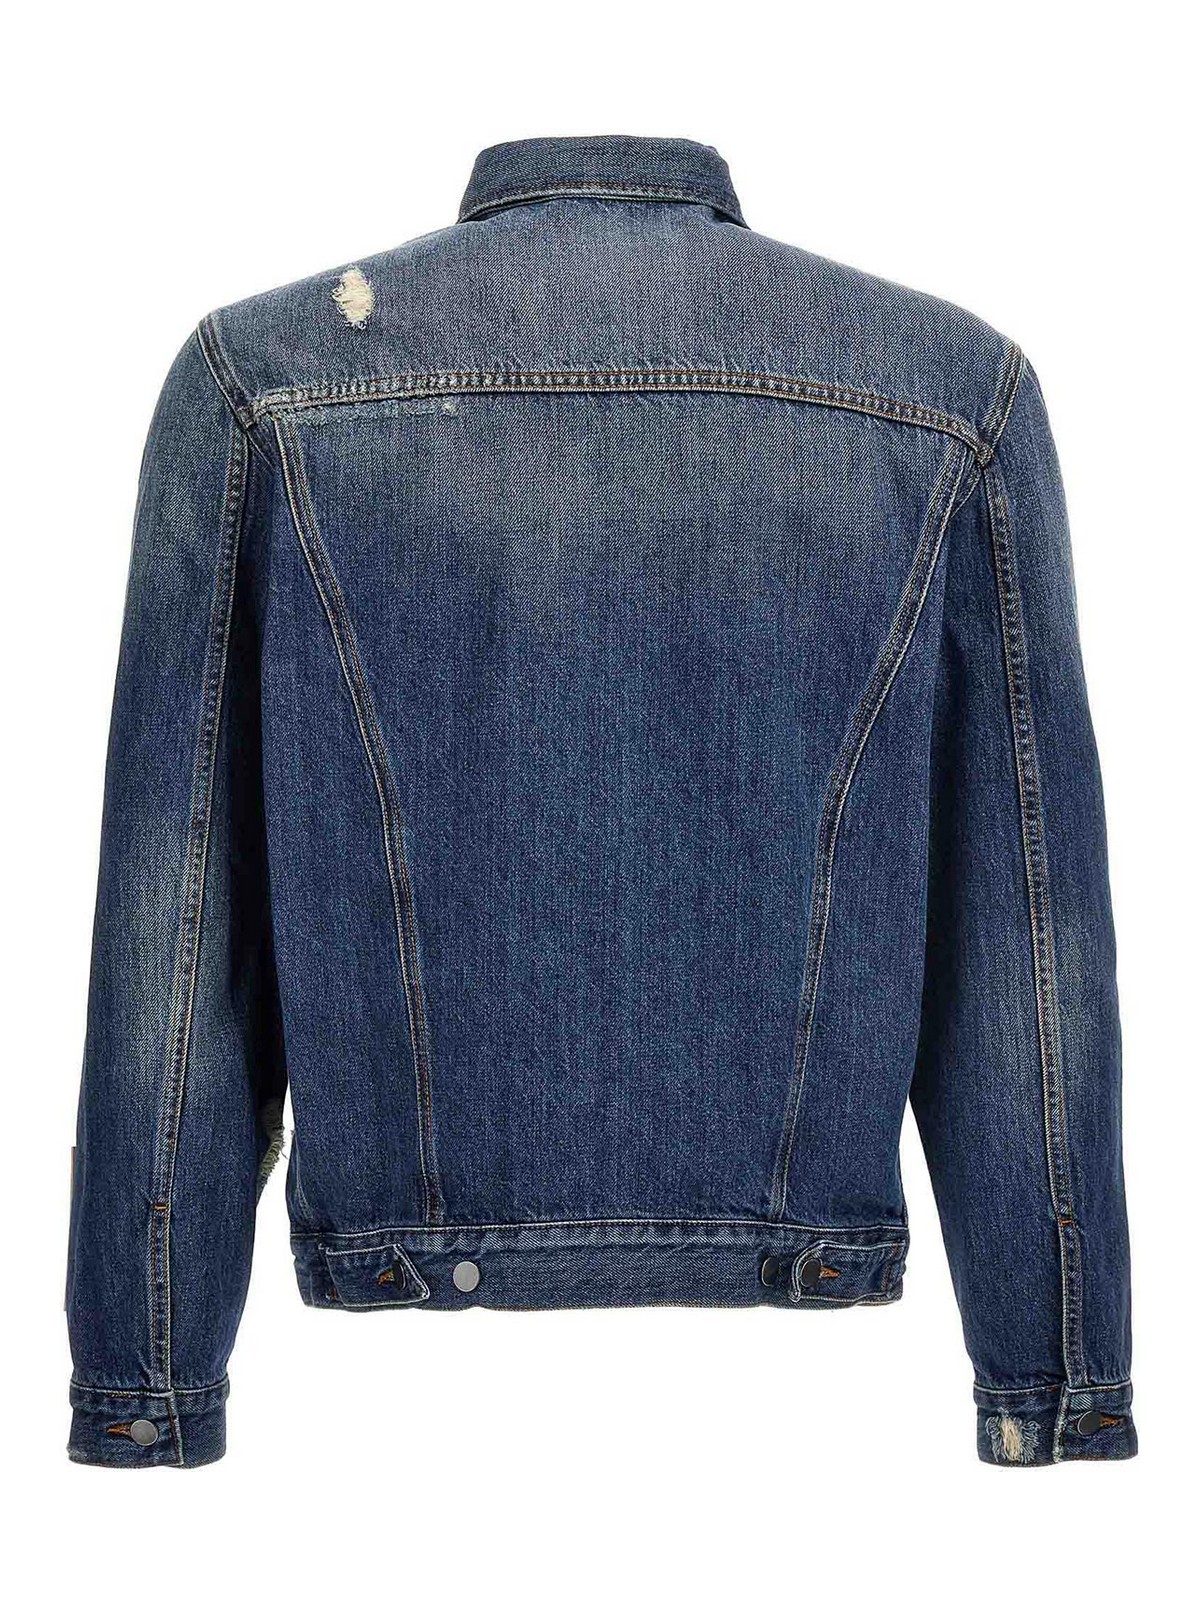 Shop A-cold-wall* Foundry Selvedge Jacket In Azul